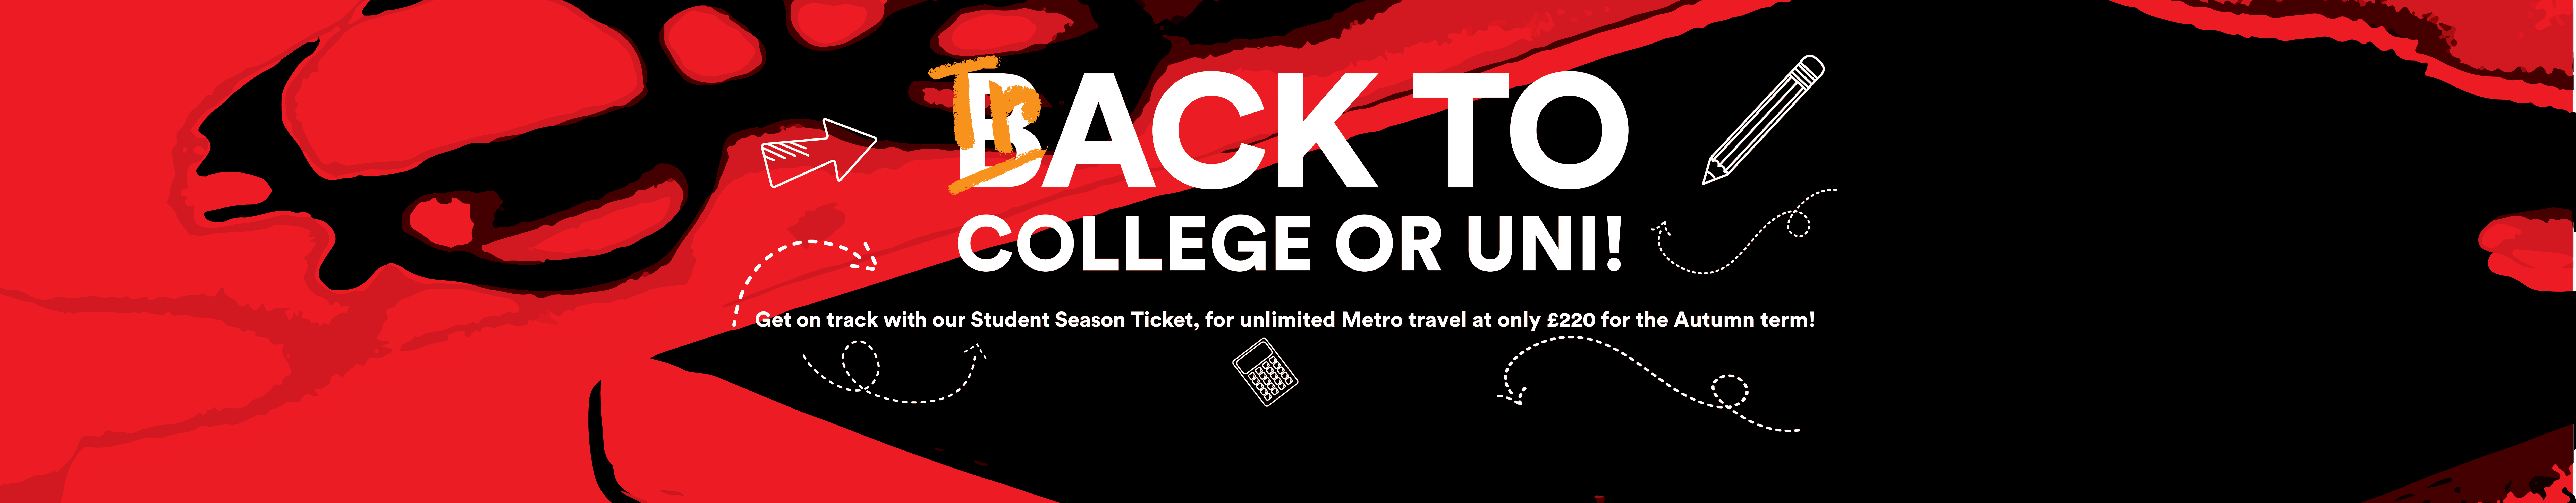 Back to college or uni! Get on track with our student season ticket, for unlimited Metro travel at only £220 for the autumn term